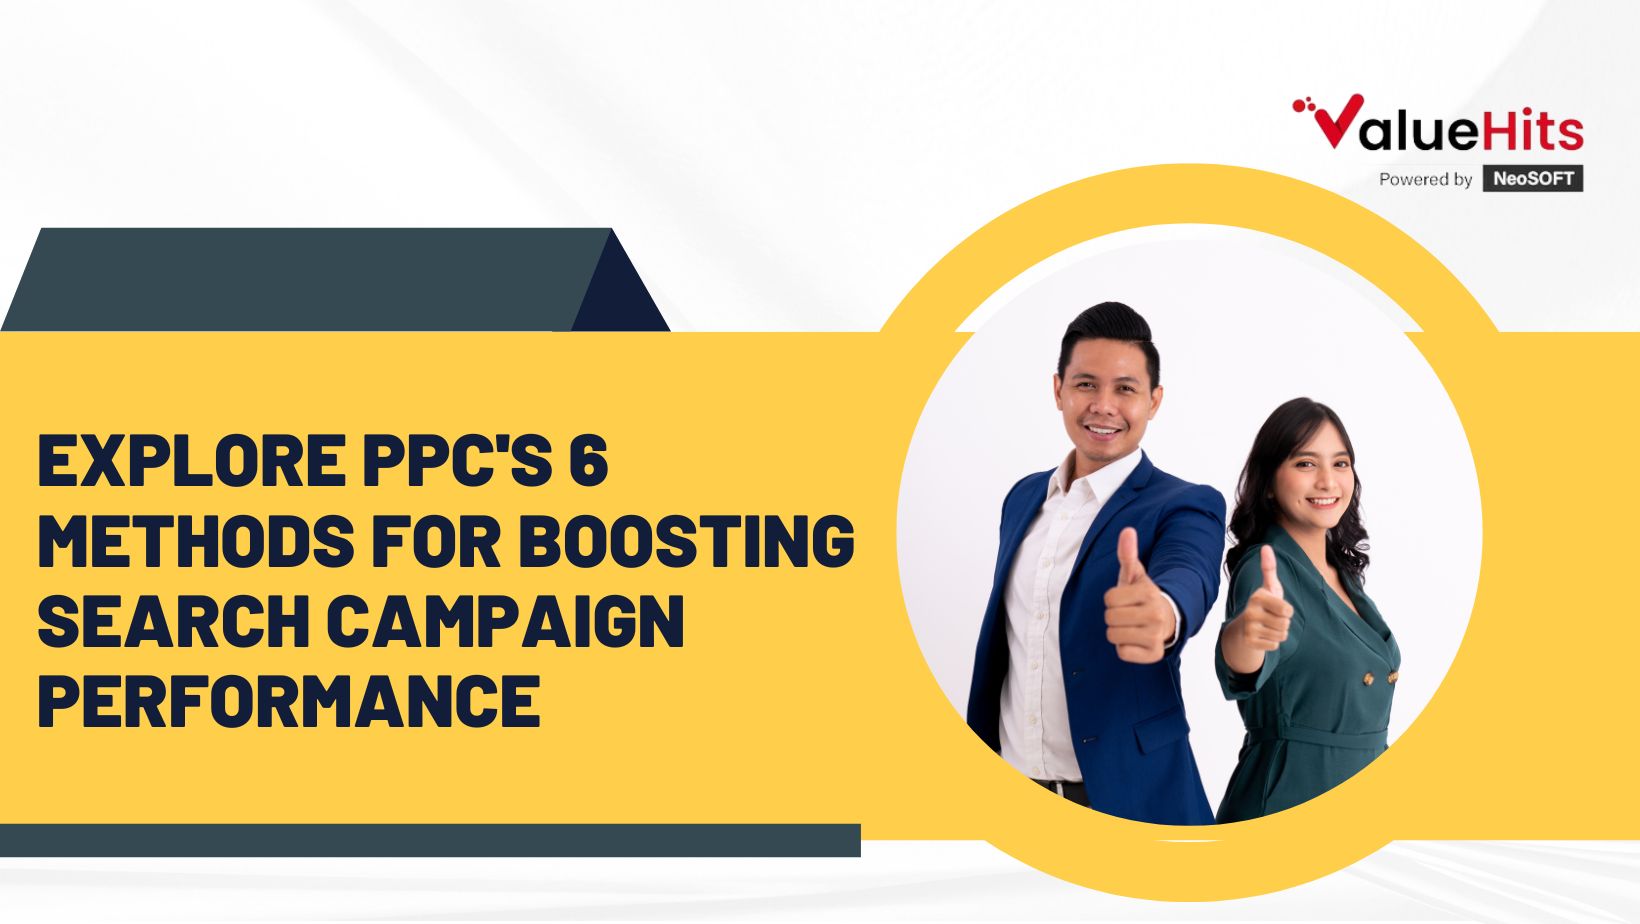 Explore PPC's 6 Methods for Boosting Search Campaign Performance